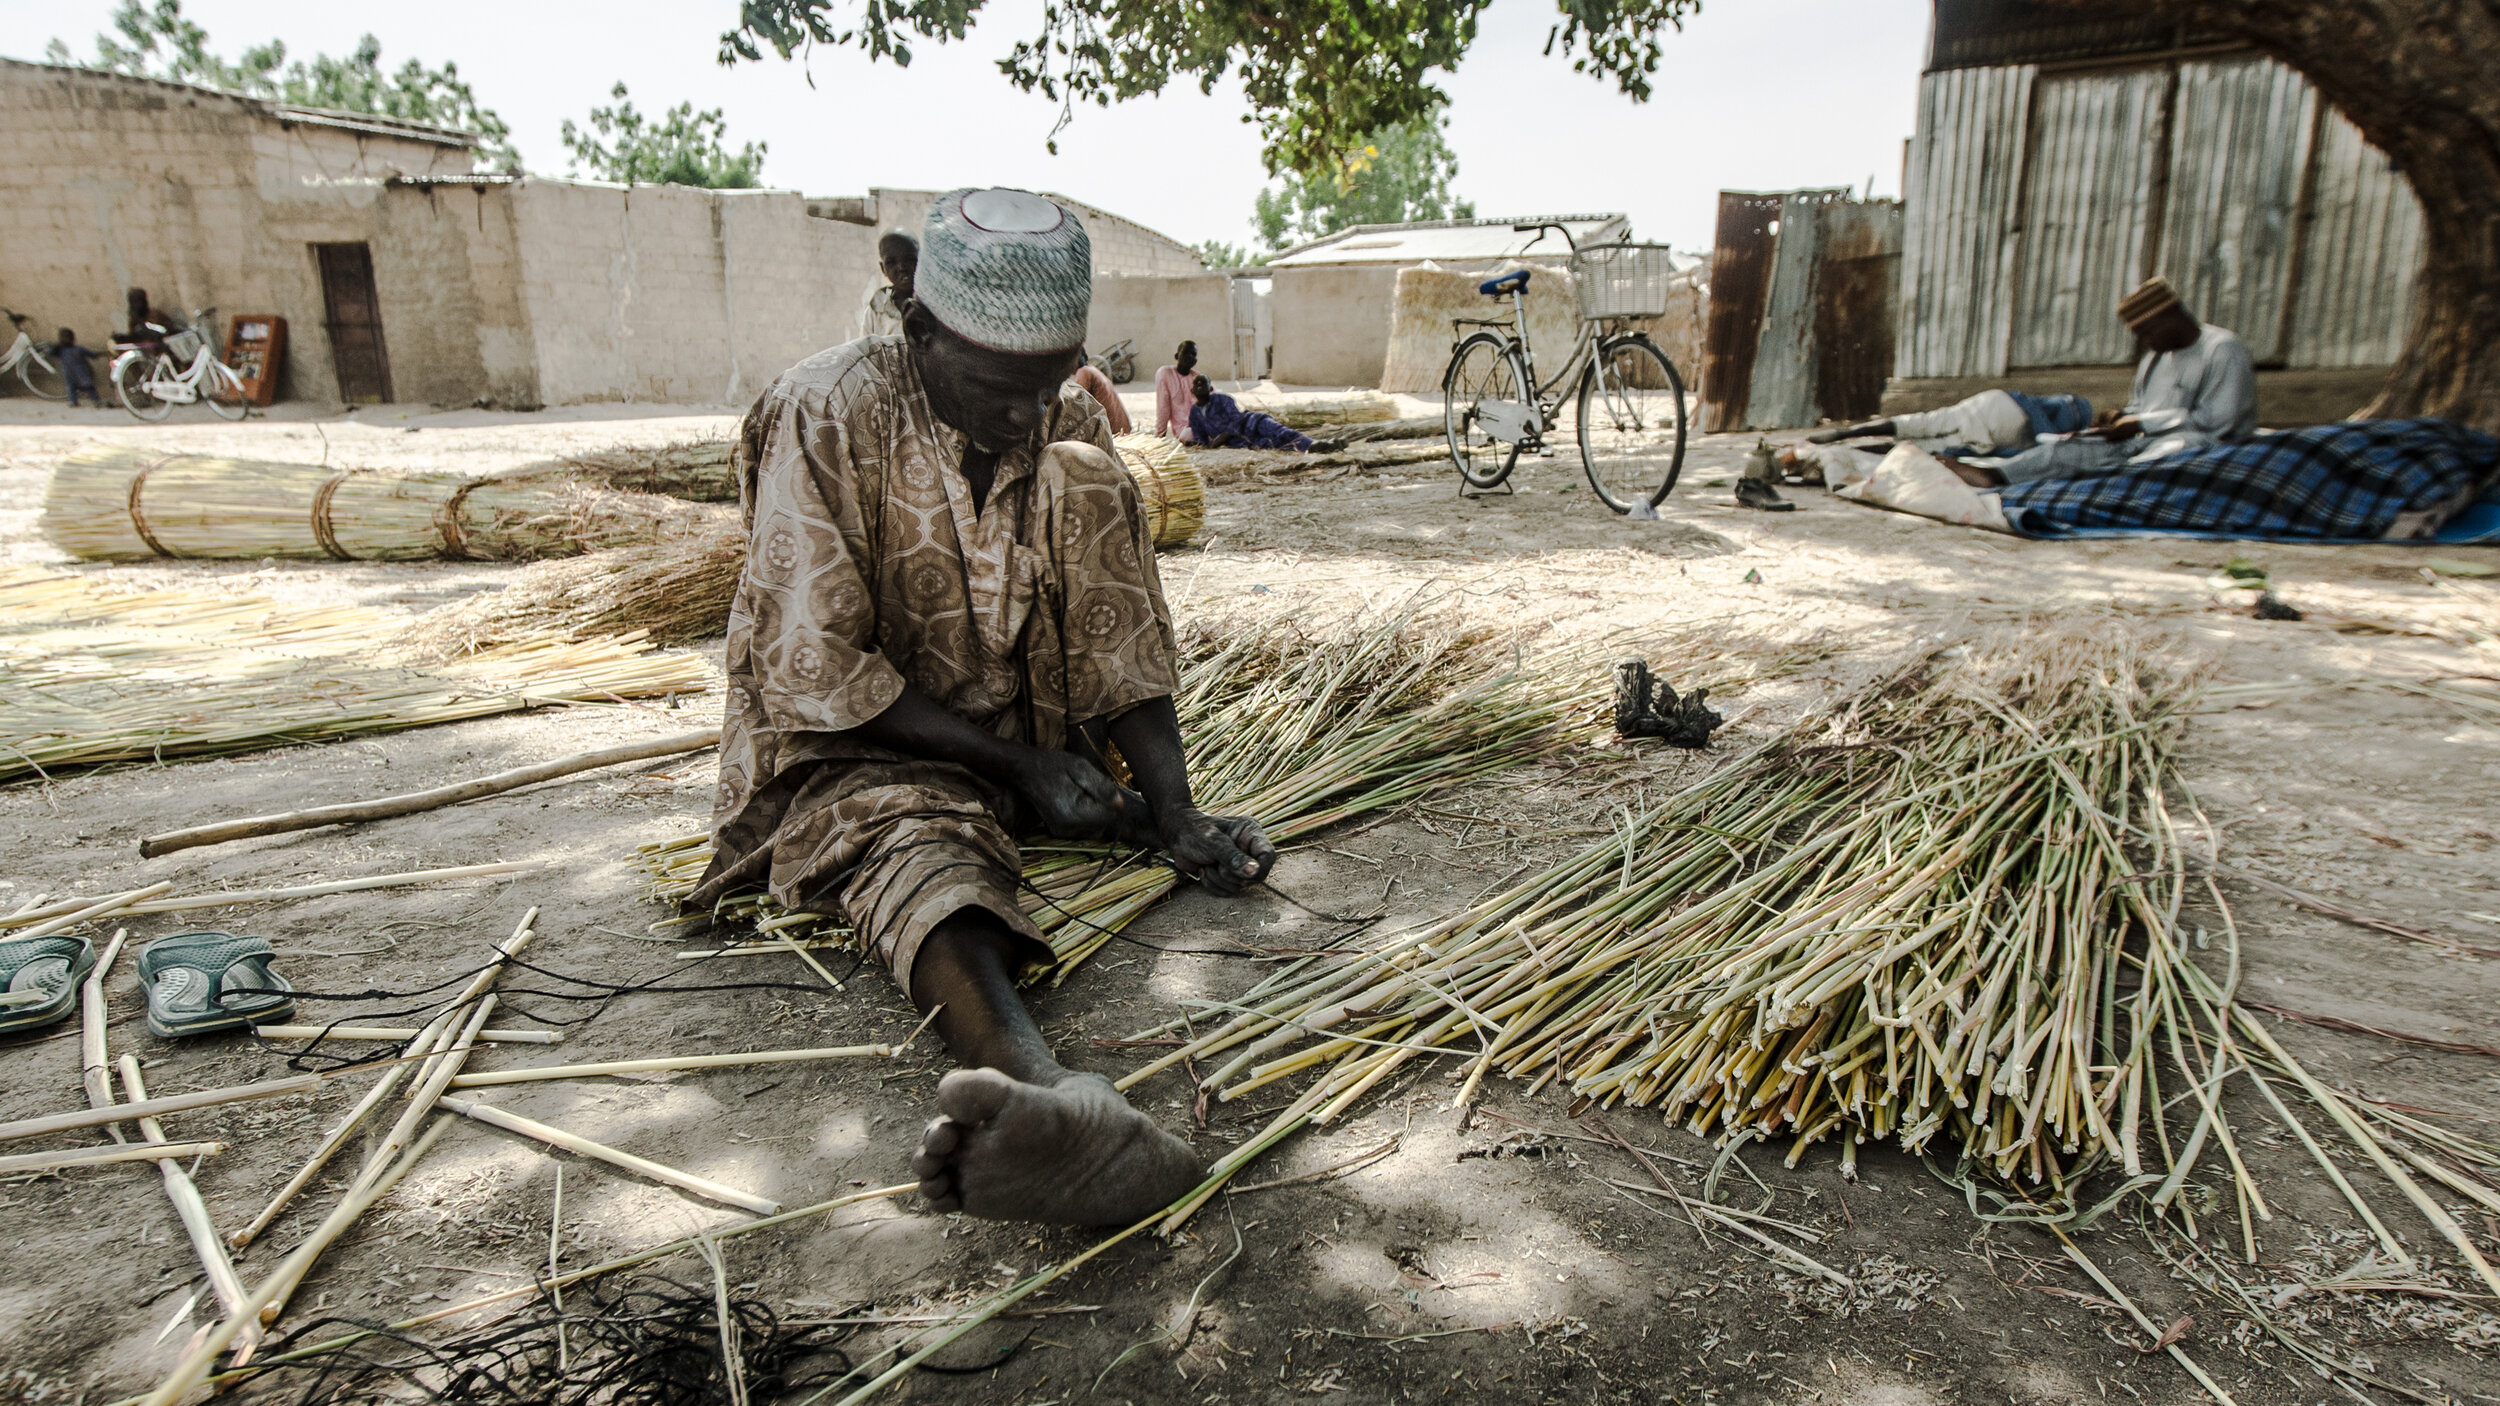  in Maiduguri’s Dalti settlement camps the main source of income is carpet making. depending on the design, some carpets take up to 3 weeks to be completed, they are then taken to be sold in town. food supplies are provided only by donations with qua